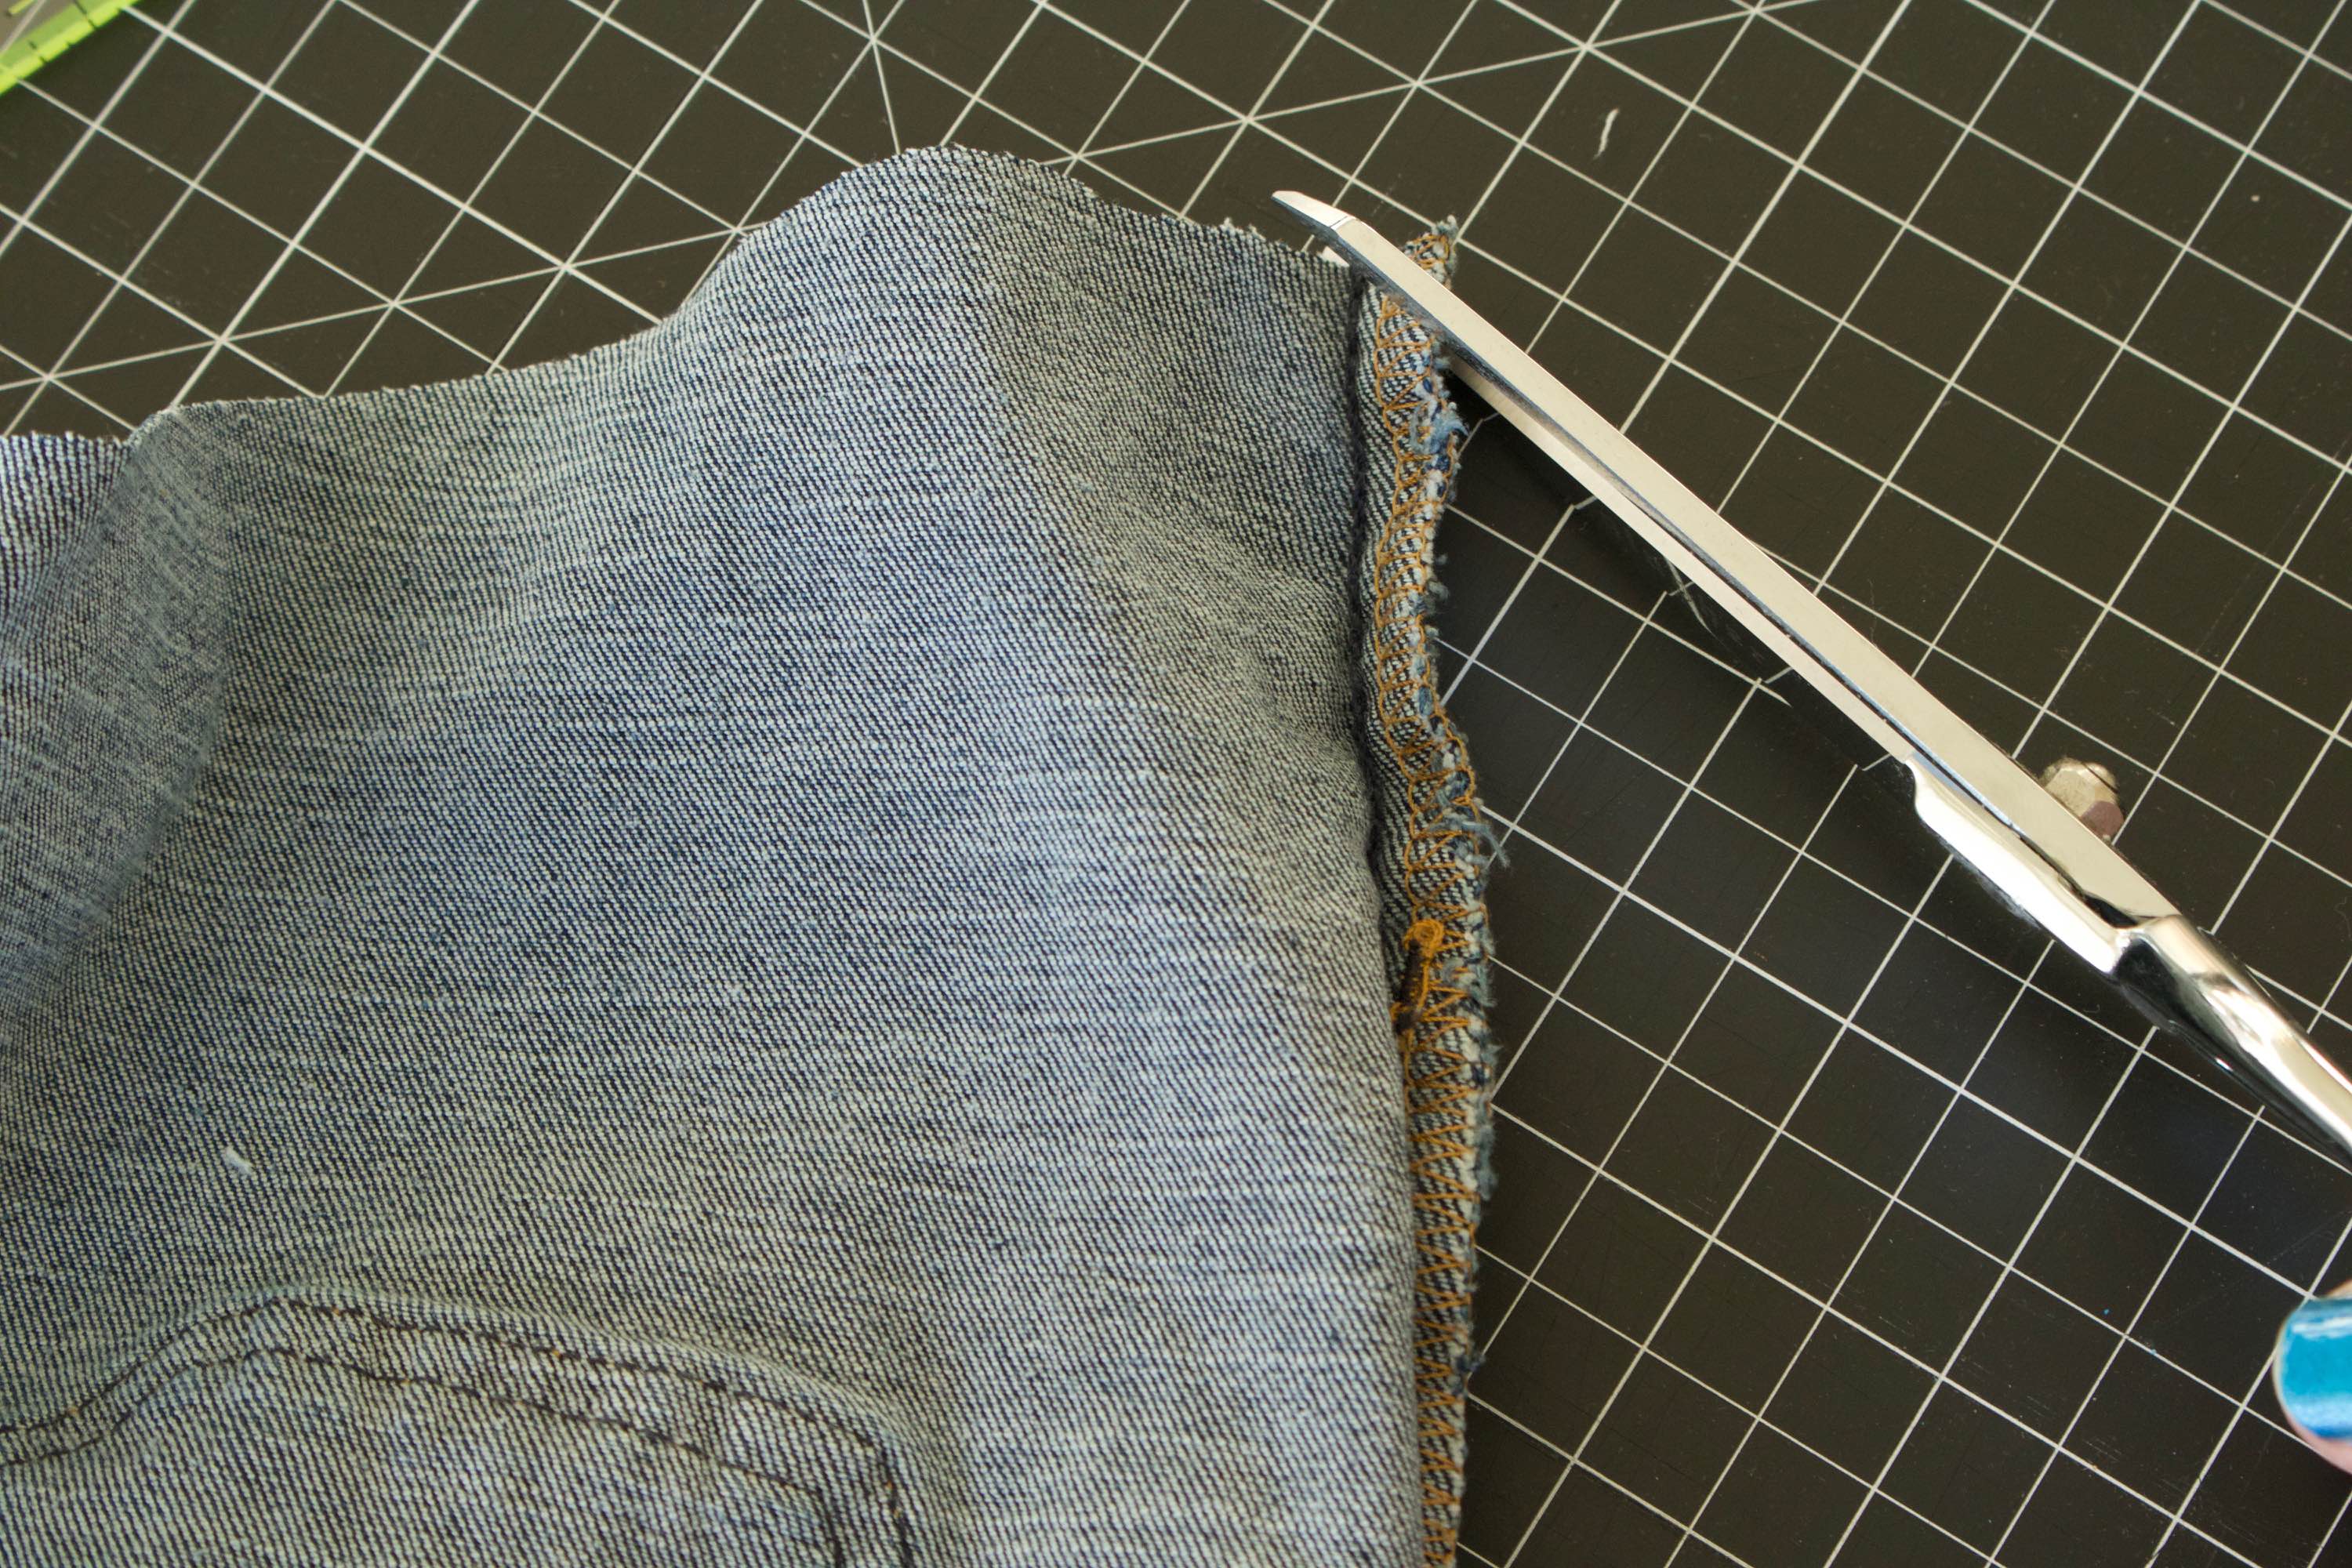 Trimming about a quarter of an inch an outseam diagonally with a pair of shears.